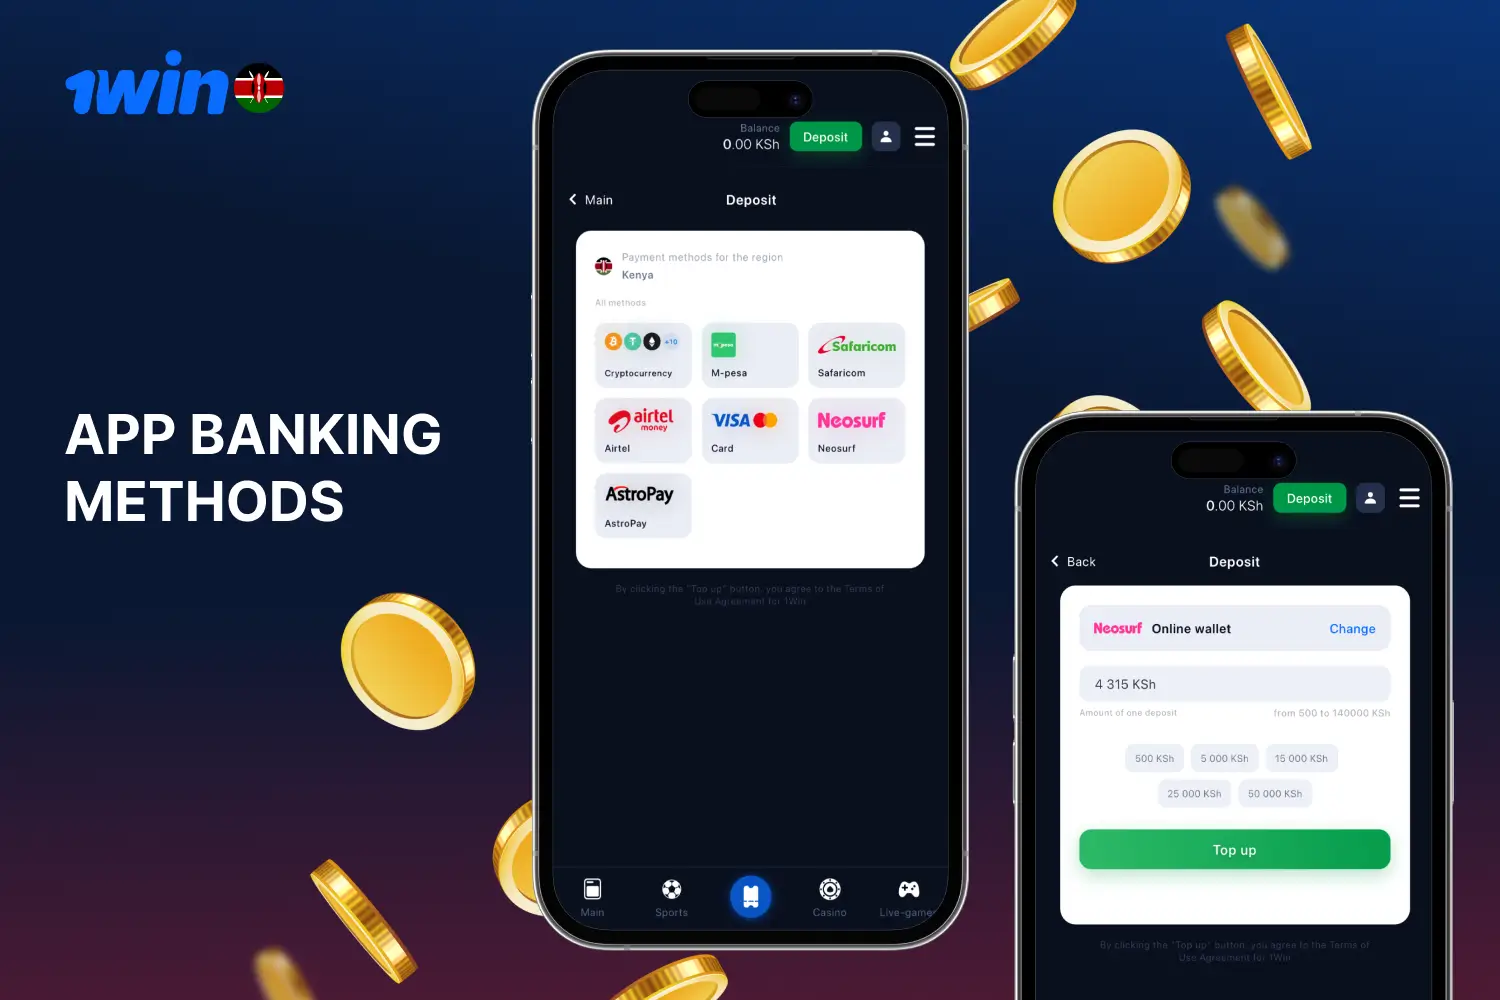 1win mobile app offers a variety of payment methods for deposits and withdrawals for Kenyan users